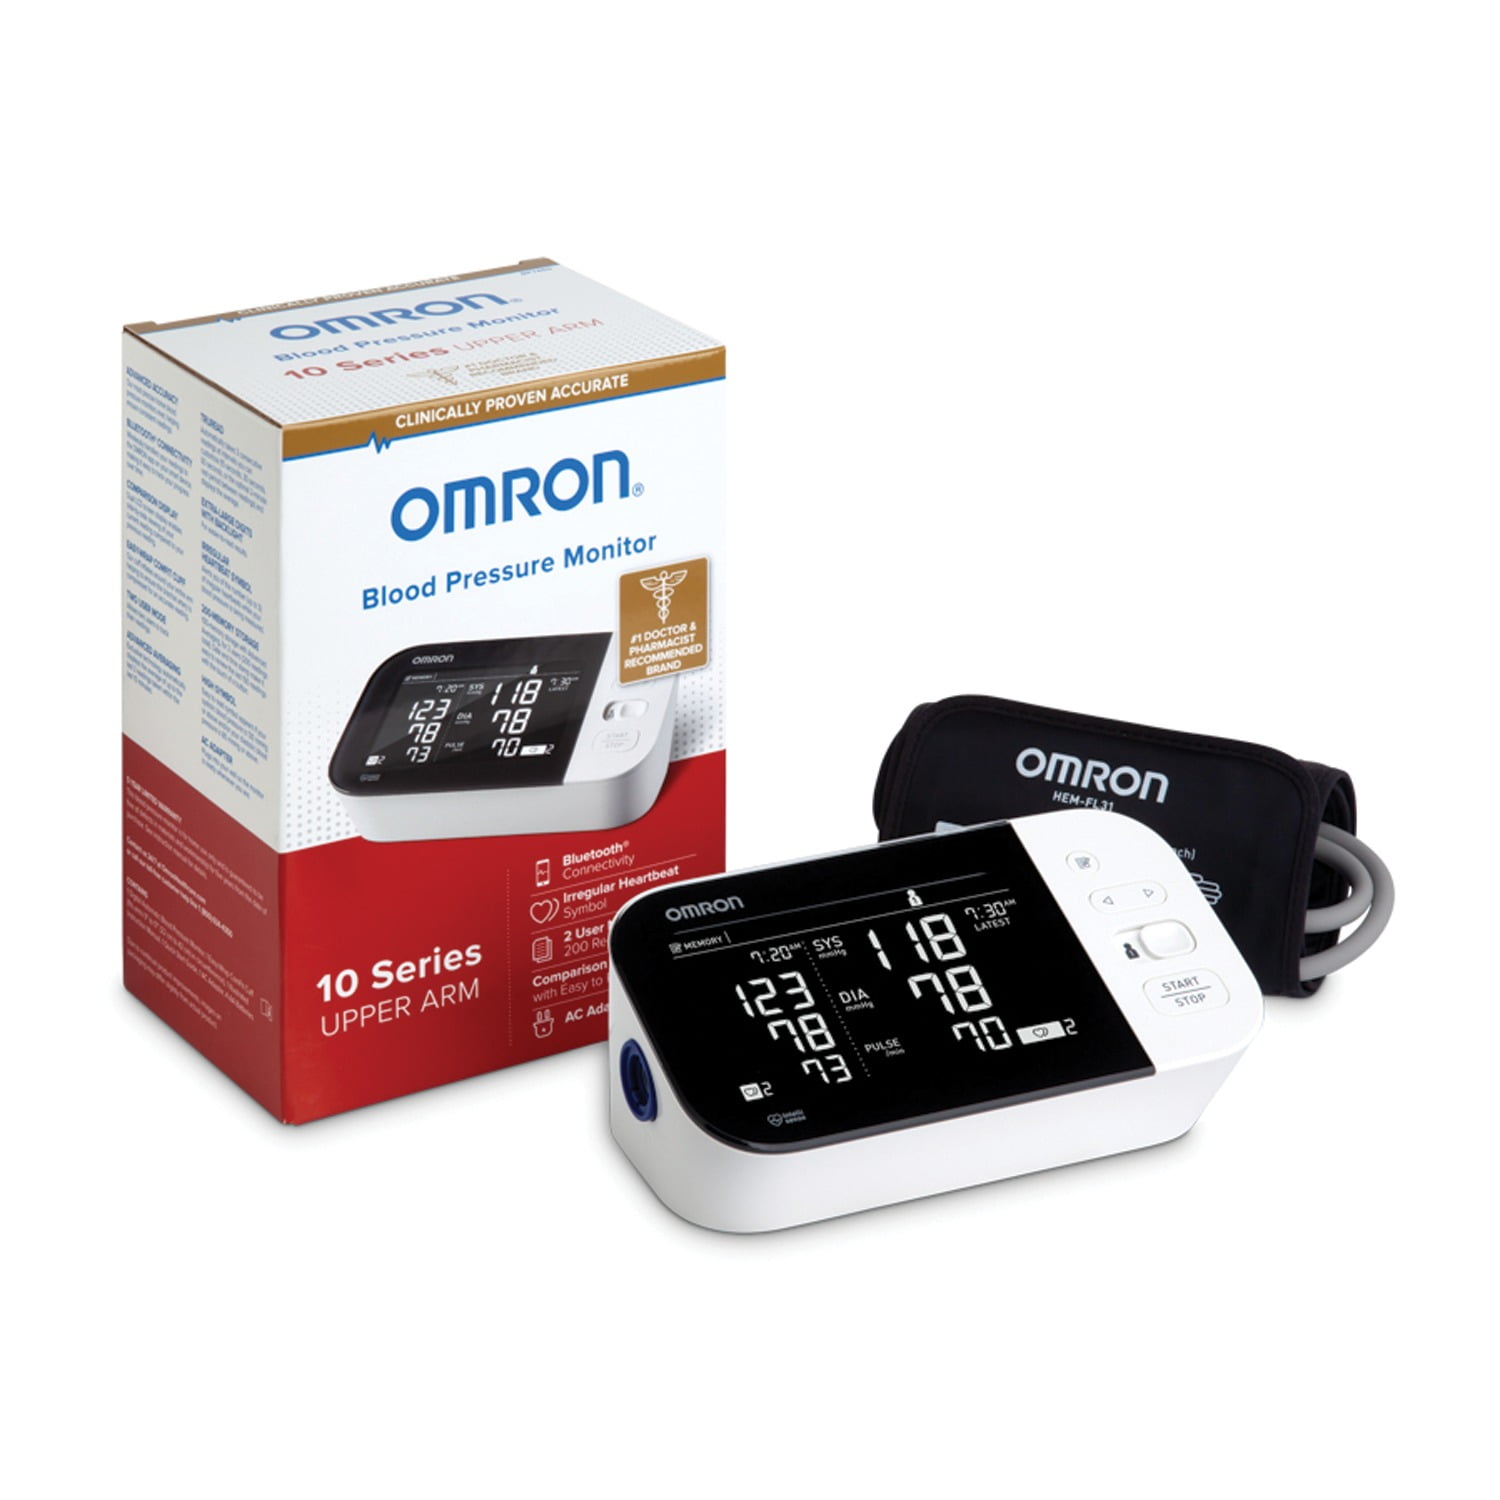 OMRON 10 Series Blood Pressure Monitor (BP7450), Upper Arm Cuff Digital  Bluetooth Blood Pressure Machine, Stores up to 200 Readings for Two Users  (100